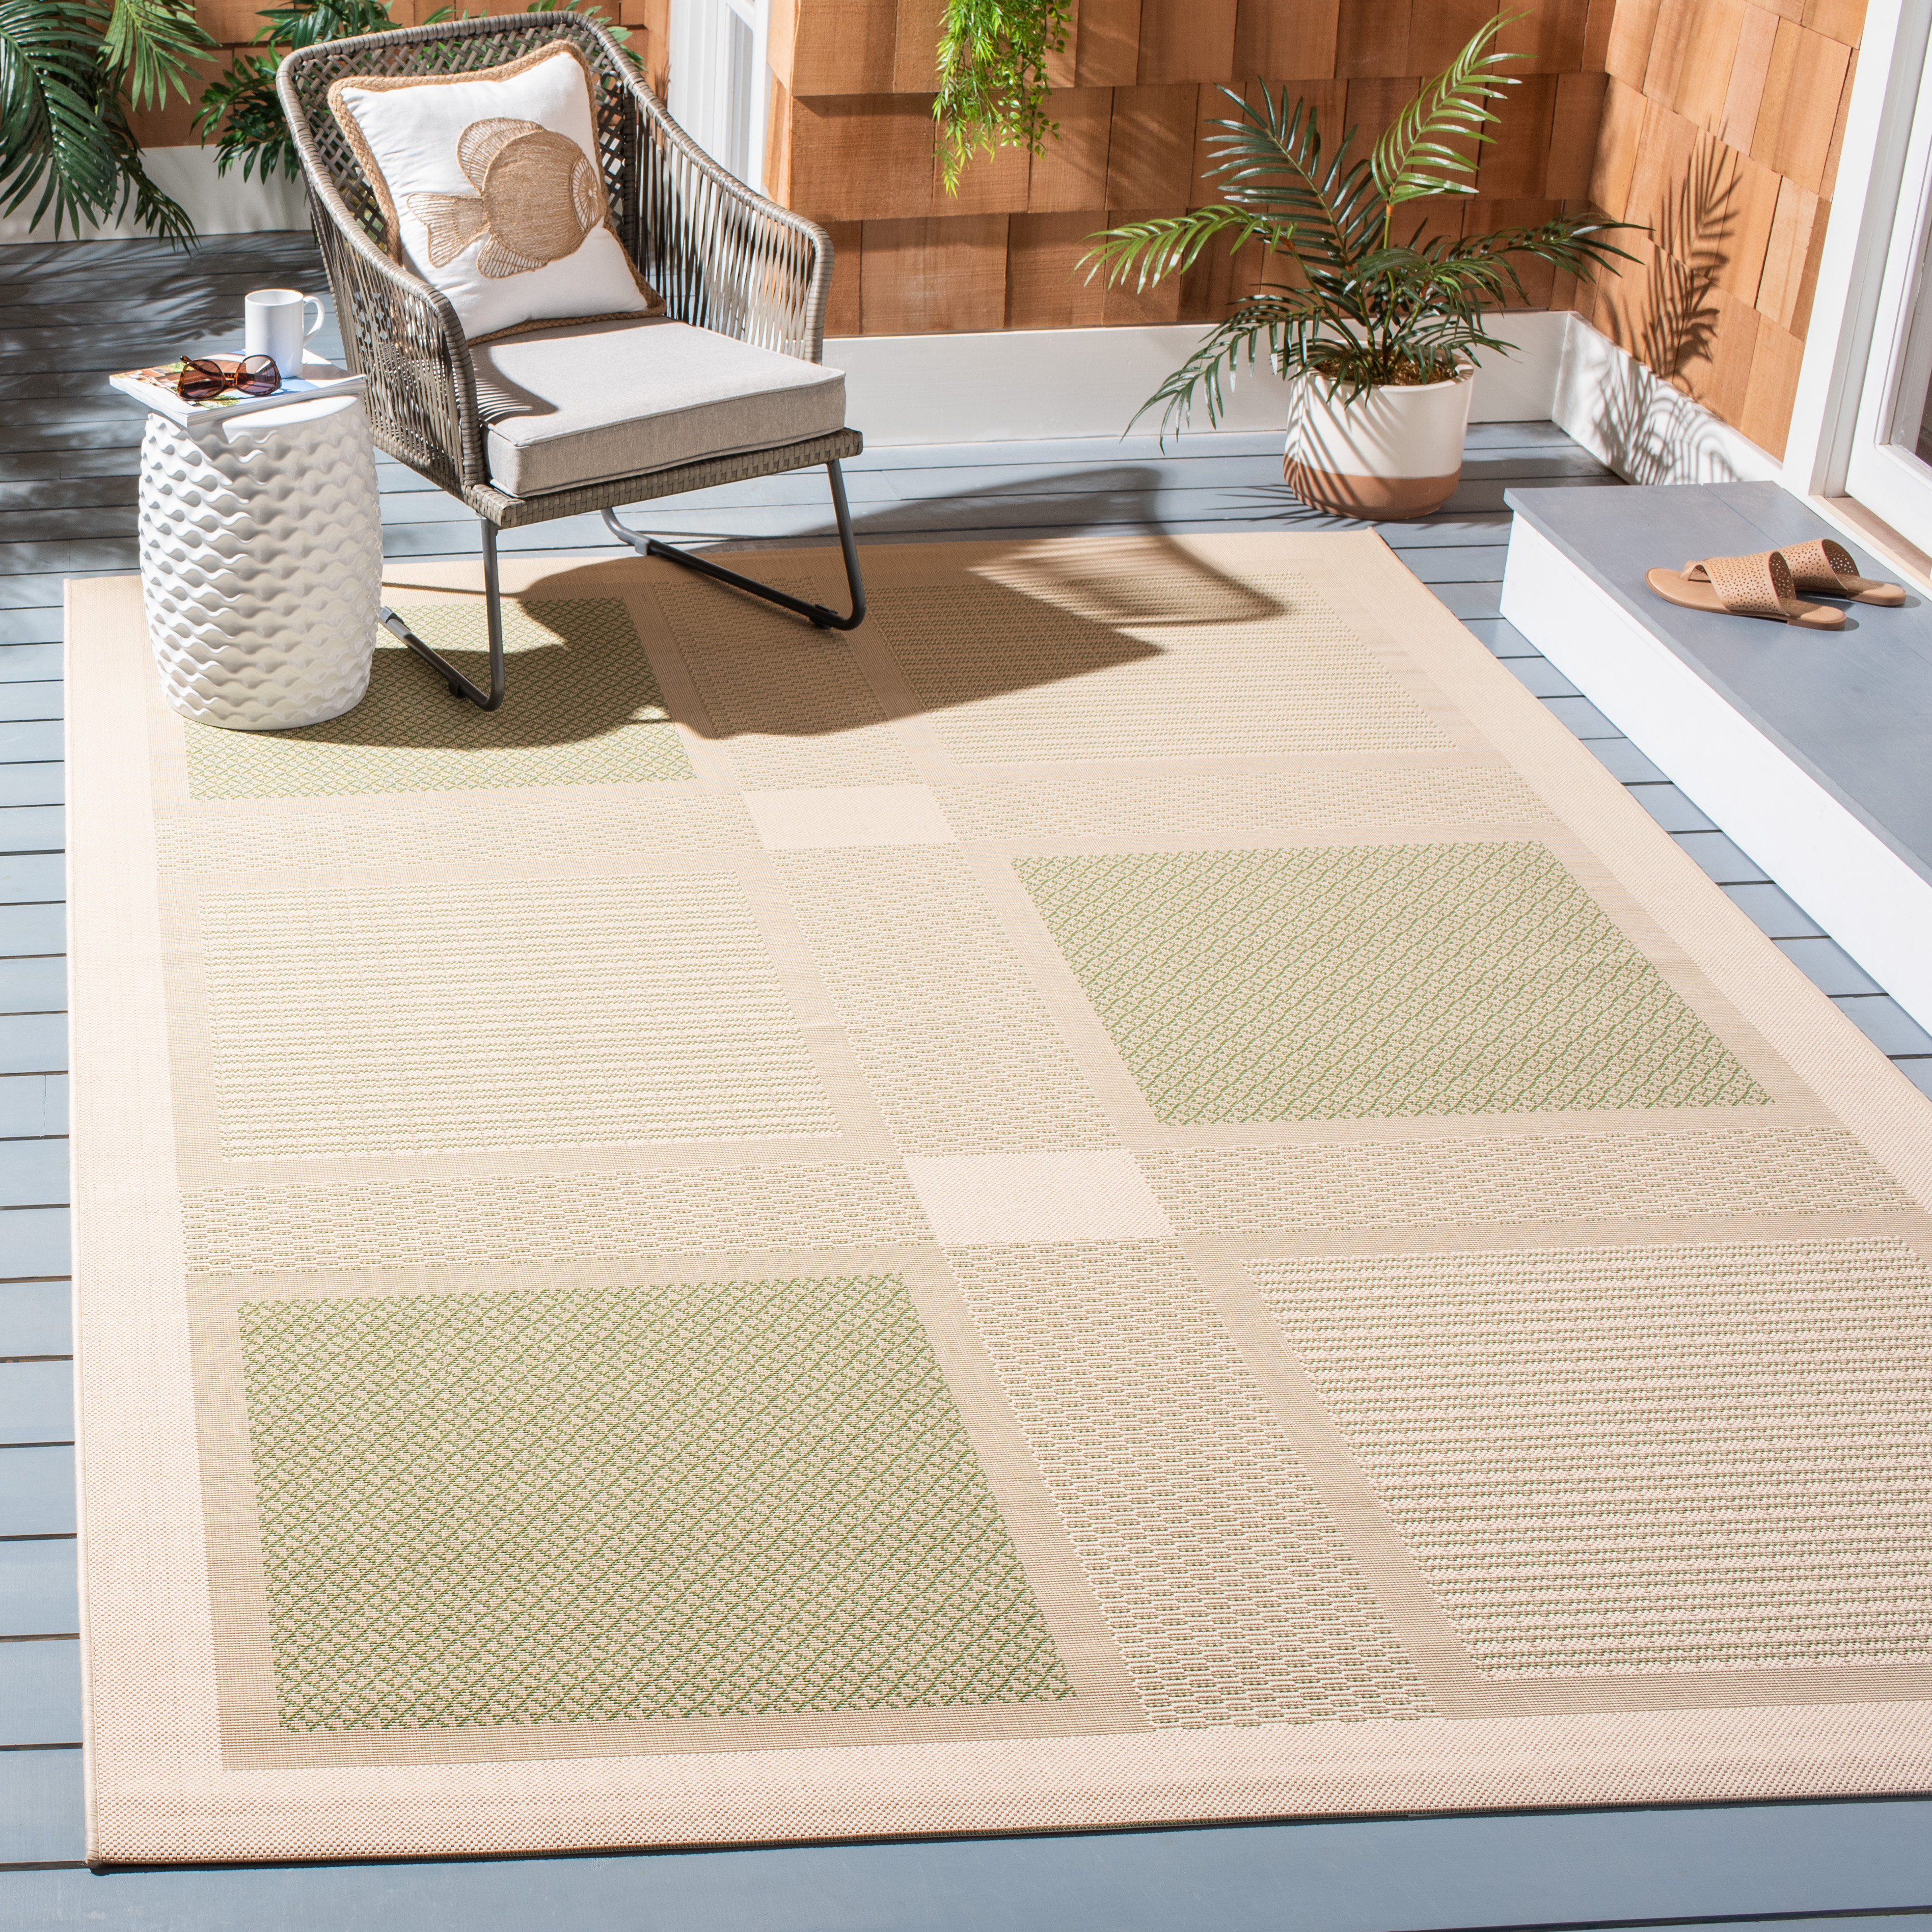 CY1928-1E01 Safavieh Indoor Olive Area Rugs Outdoor Natural 